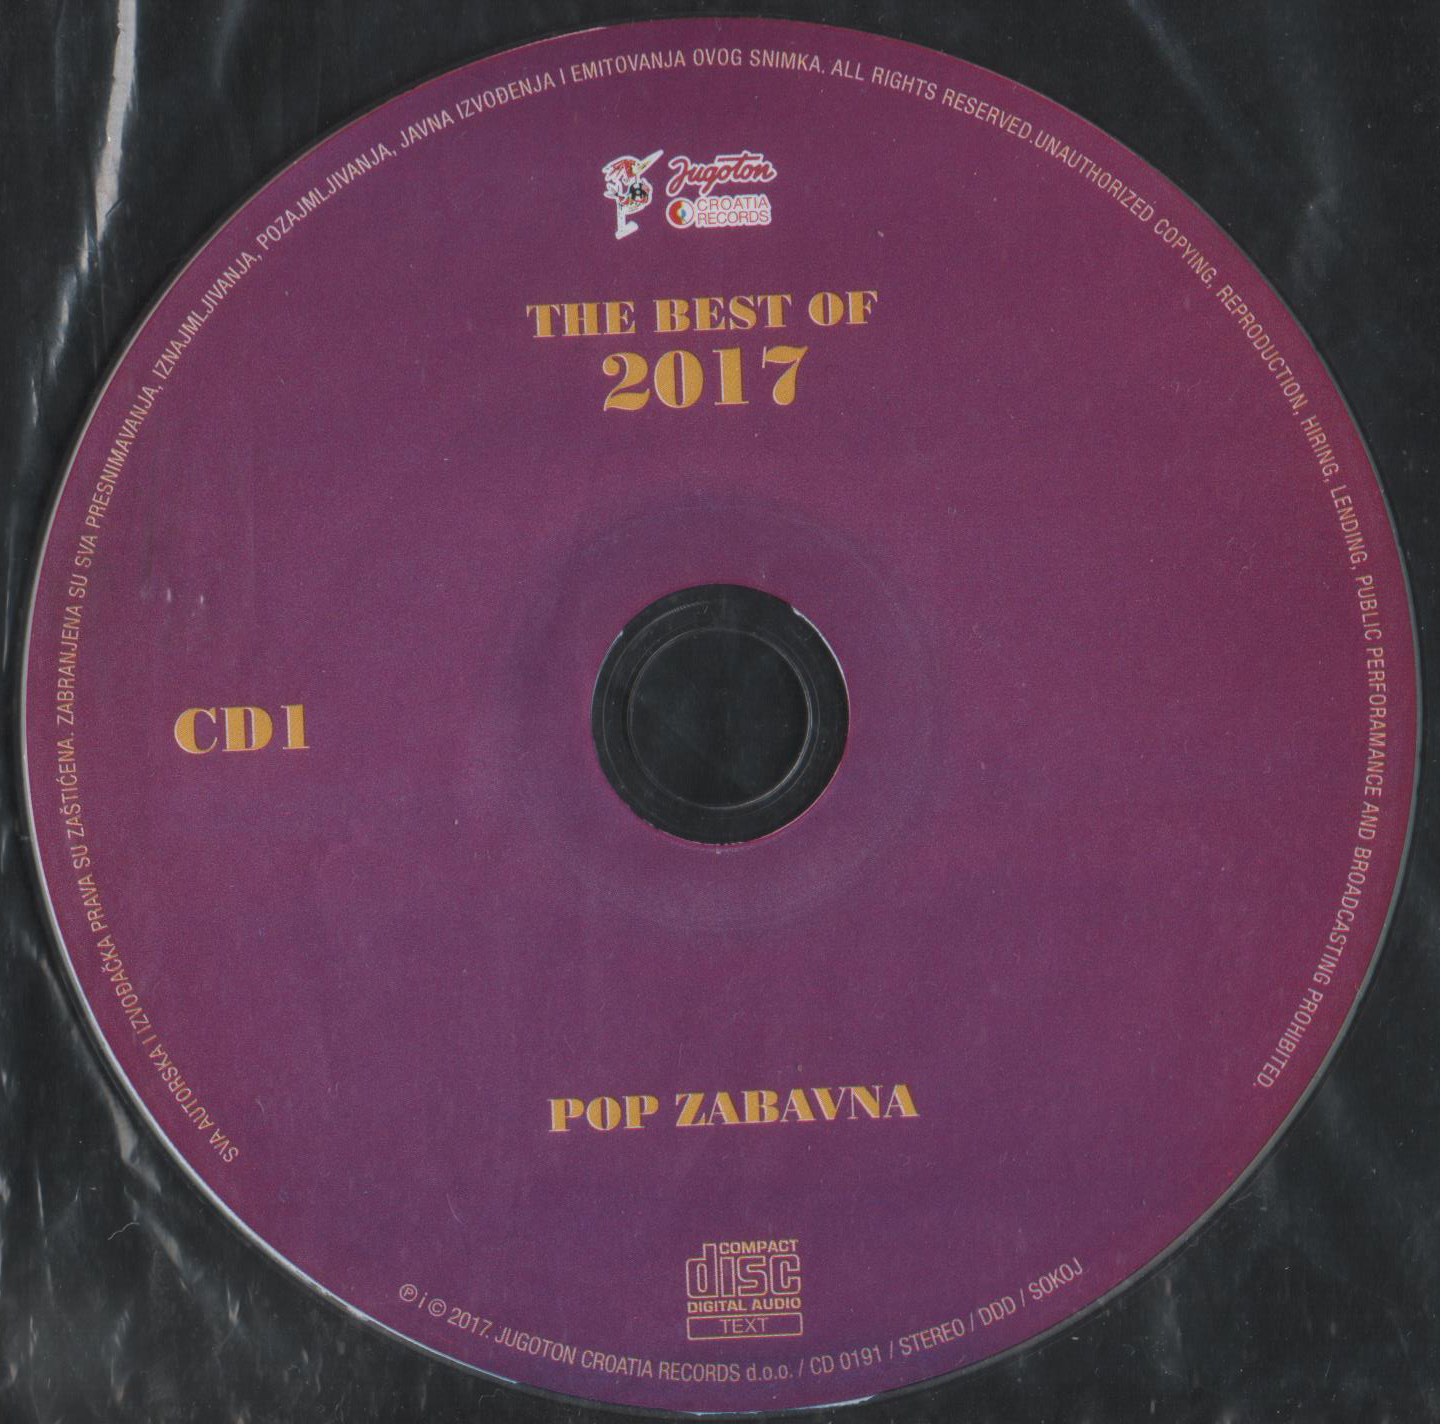 The Best Of 2017 CD 1